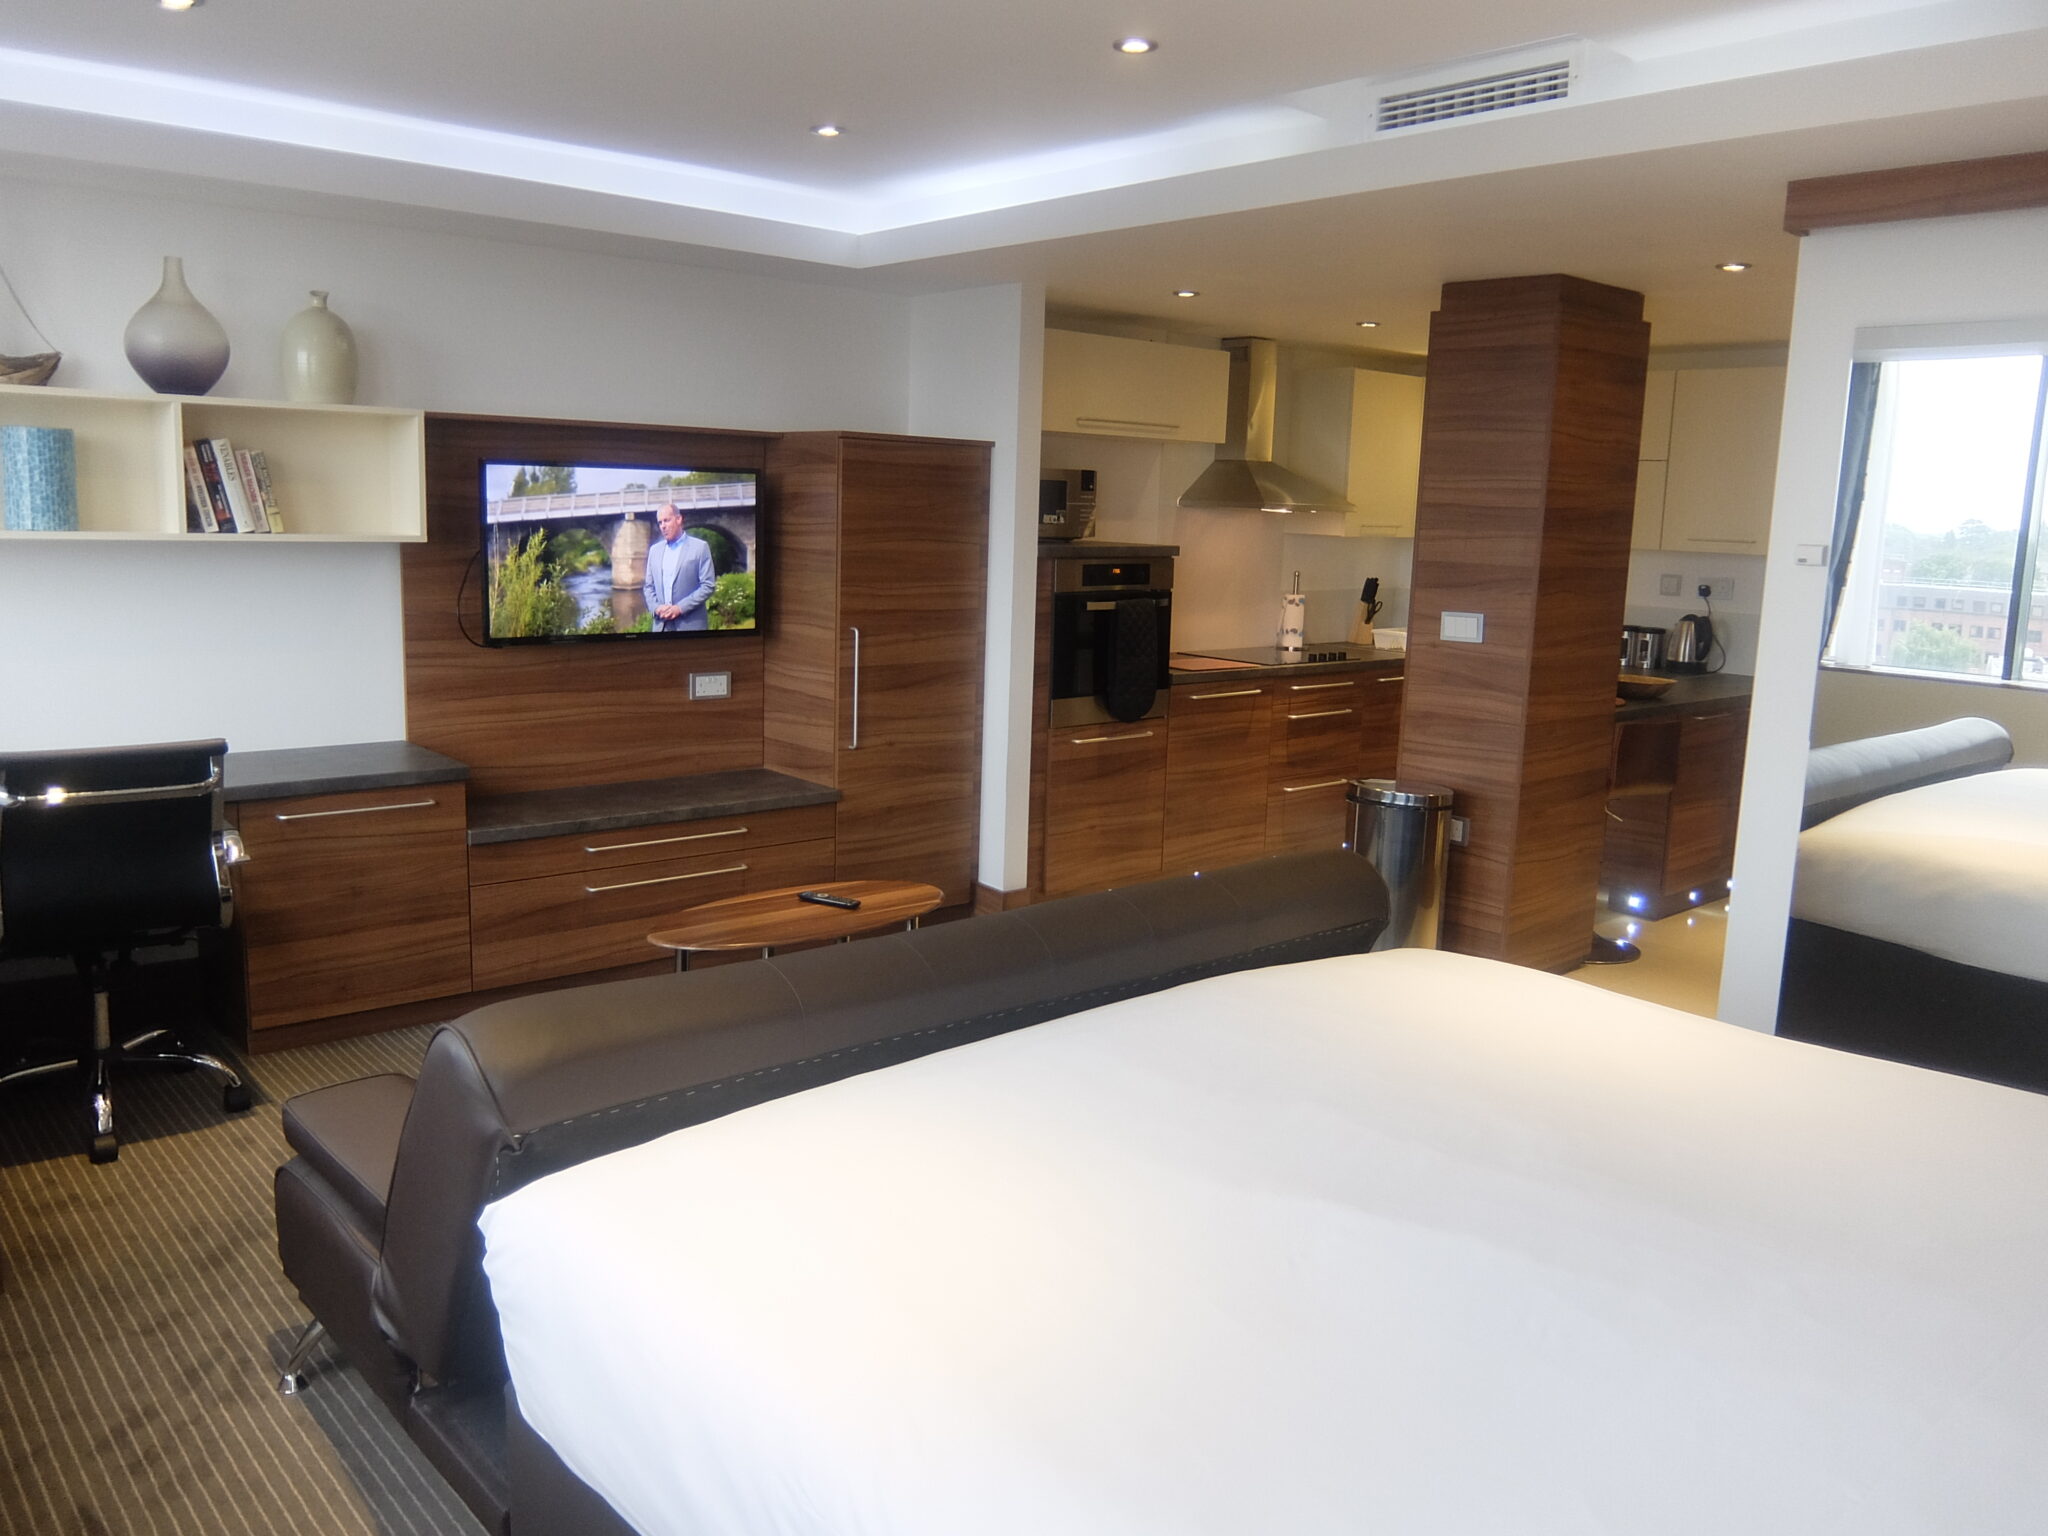 Kings Oak House Apartments - West London Serviced Apartments - Watford | Urban Stay